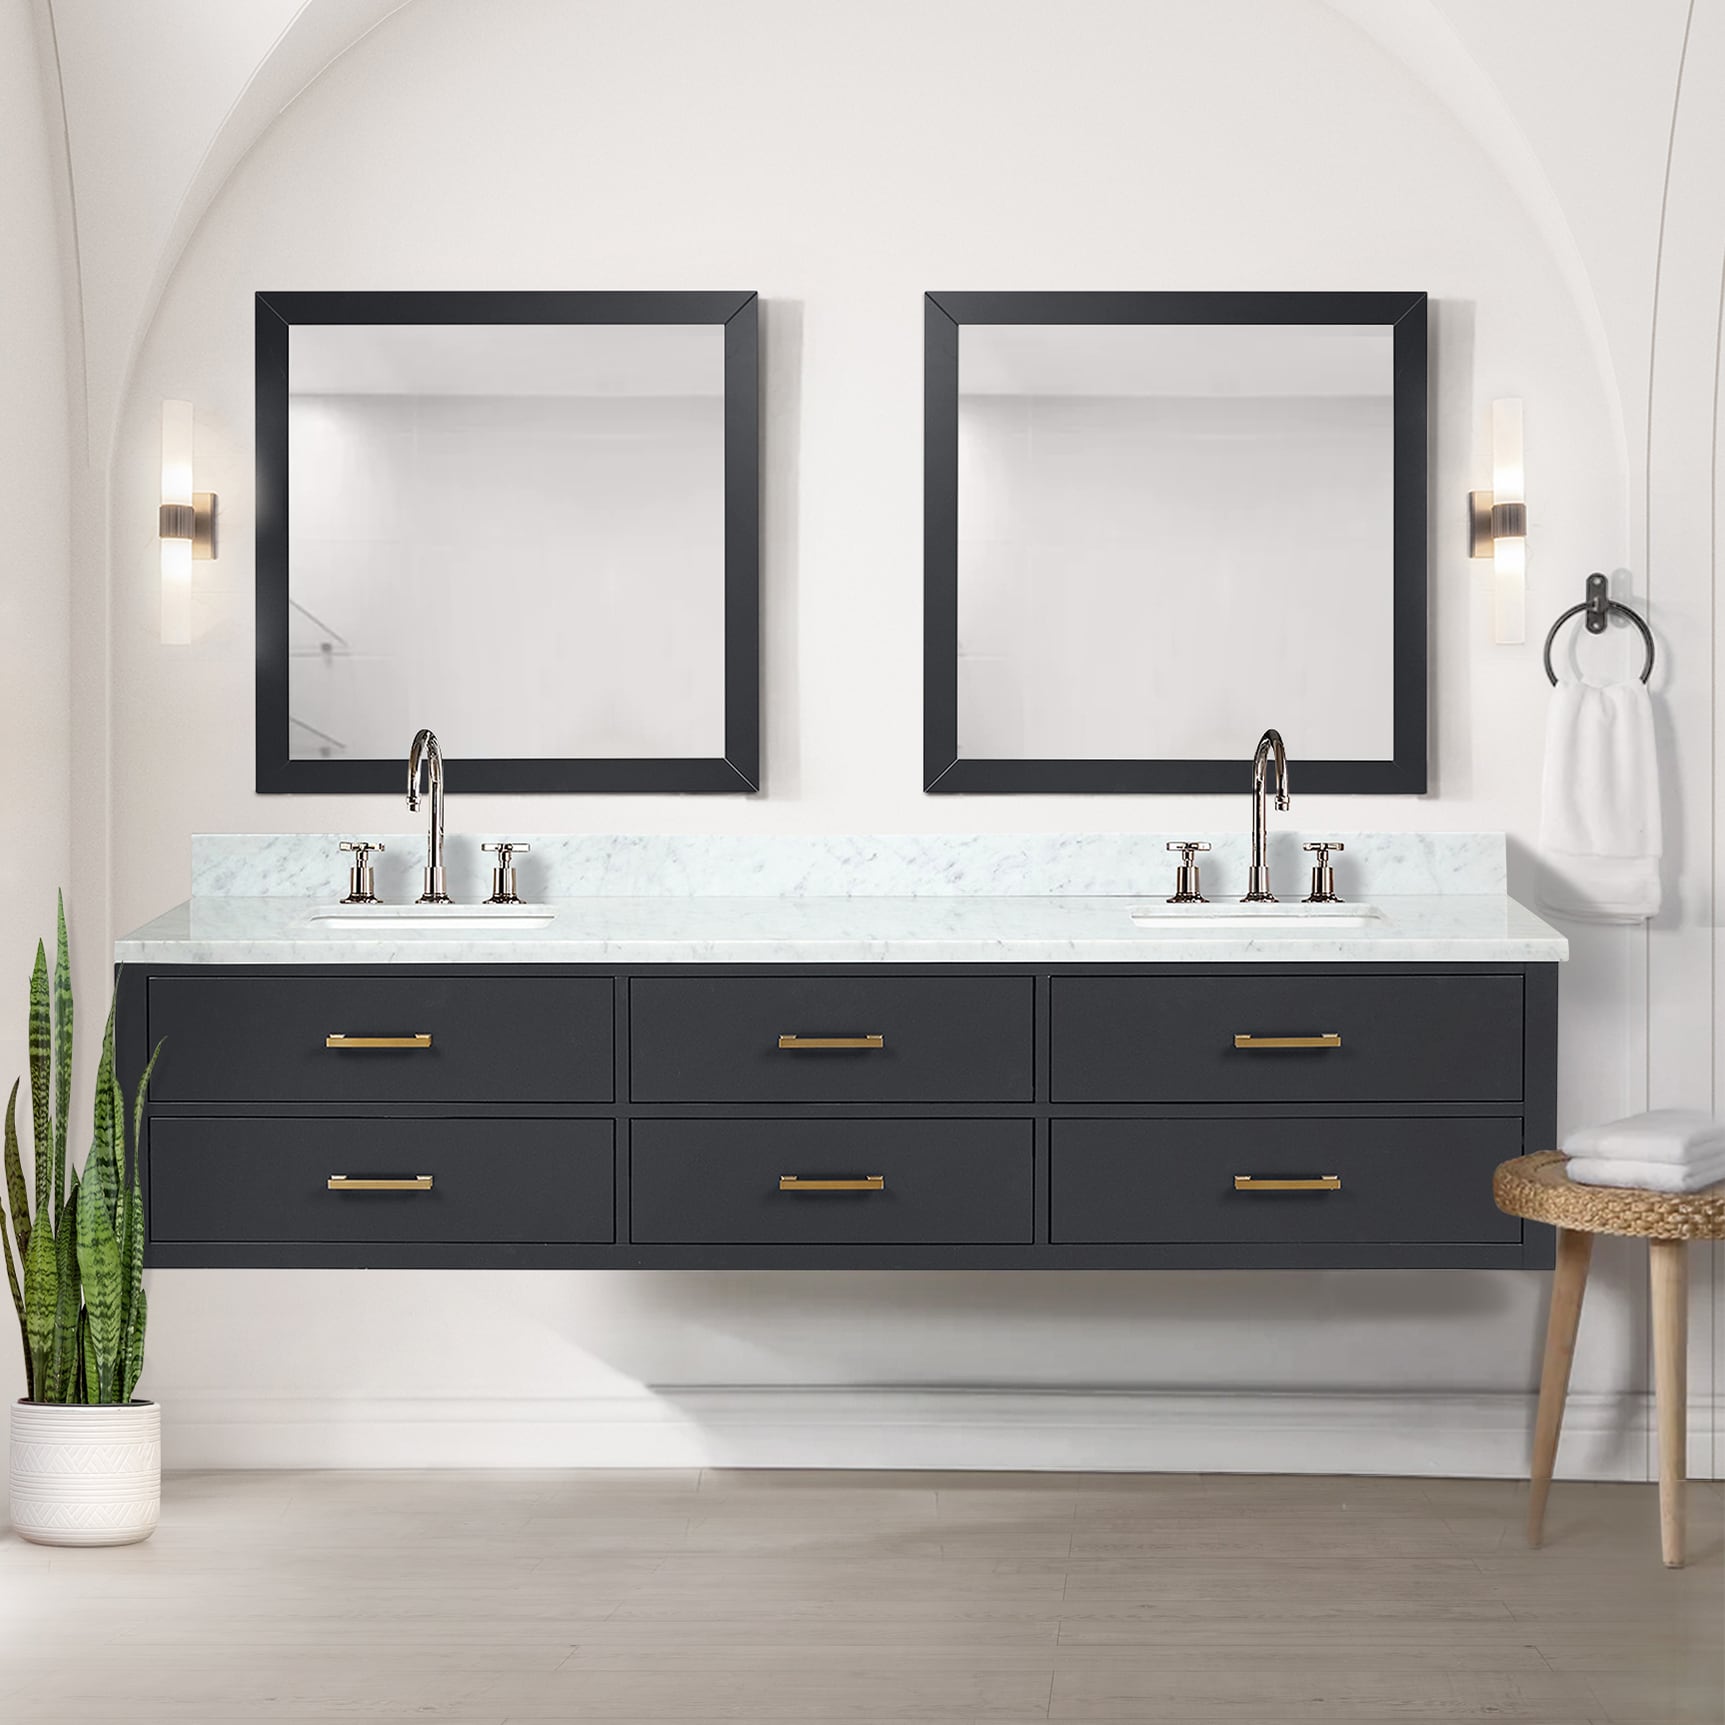 Southold 84-in Black Undermount Double Sink Floating Bathroom Vanity with White Marble Top | - Lexora LVSO84DL101